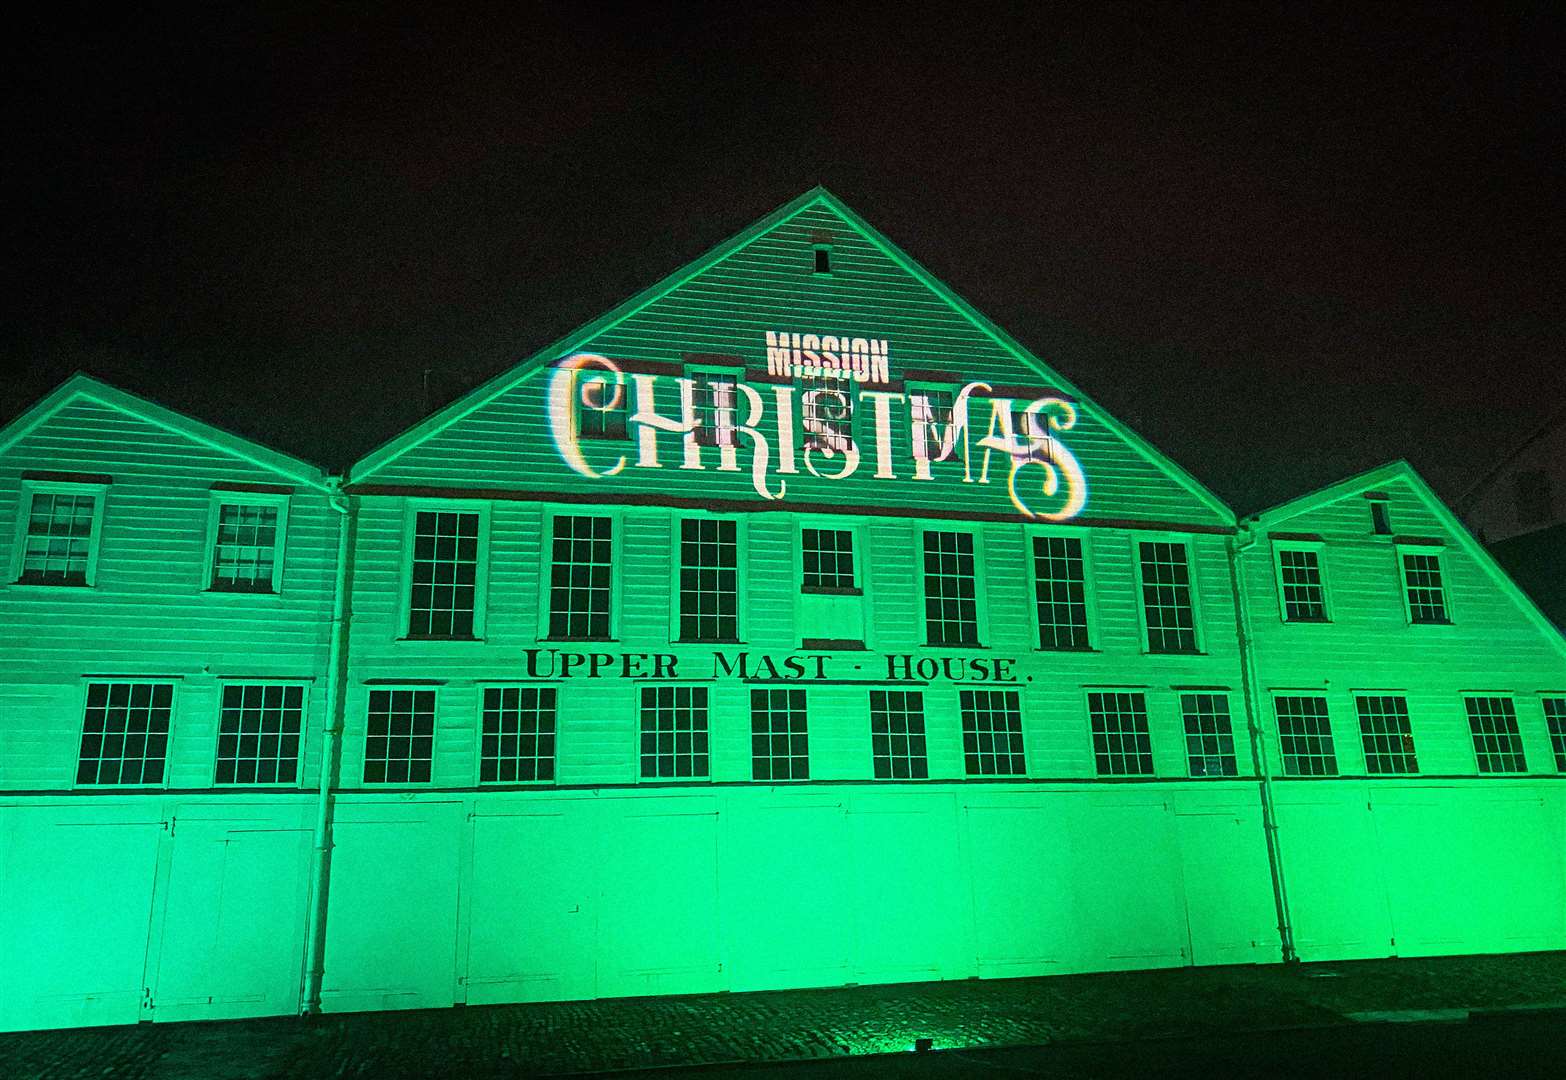 We are shown the way to Mission Christmas headquarters by an illuminated sign. All pictures: Sam Lawrie